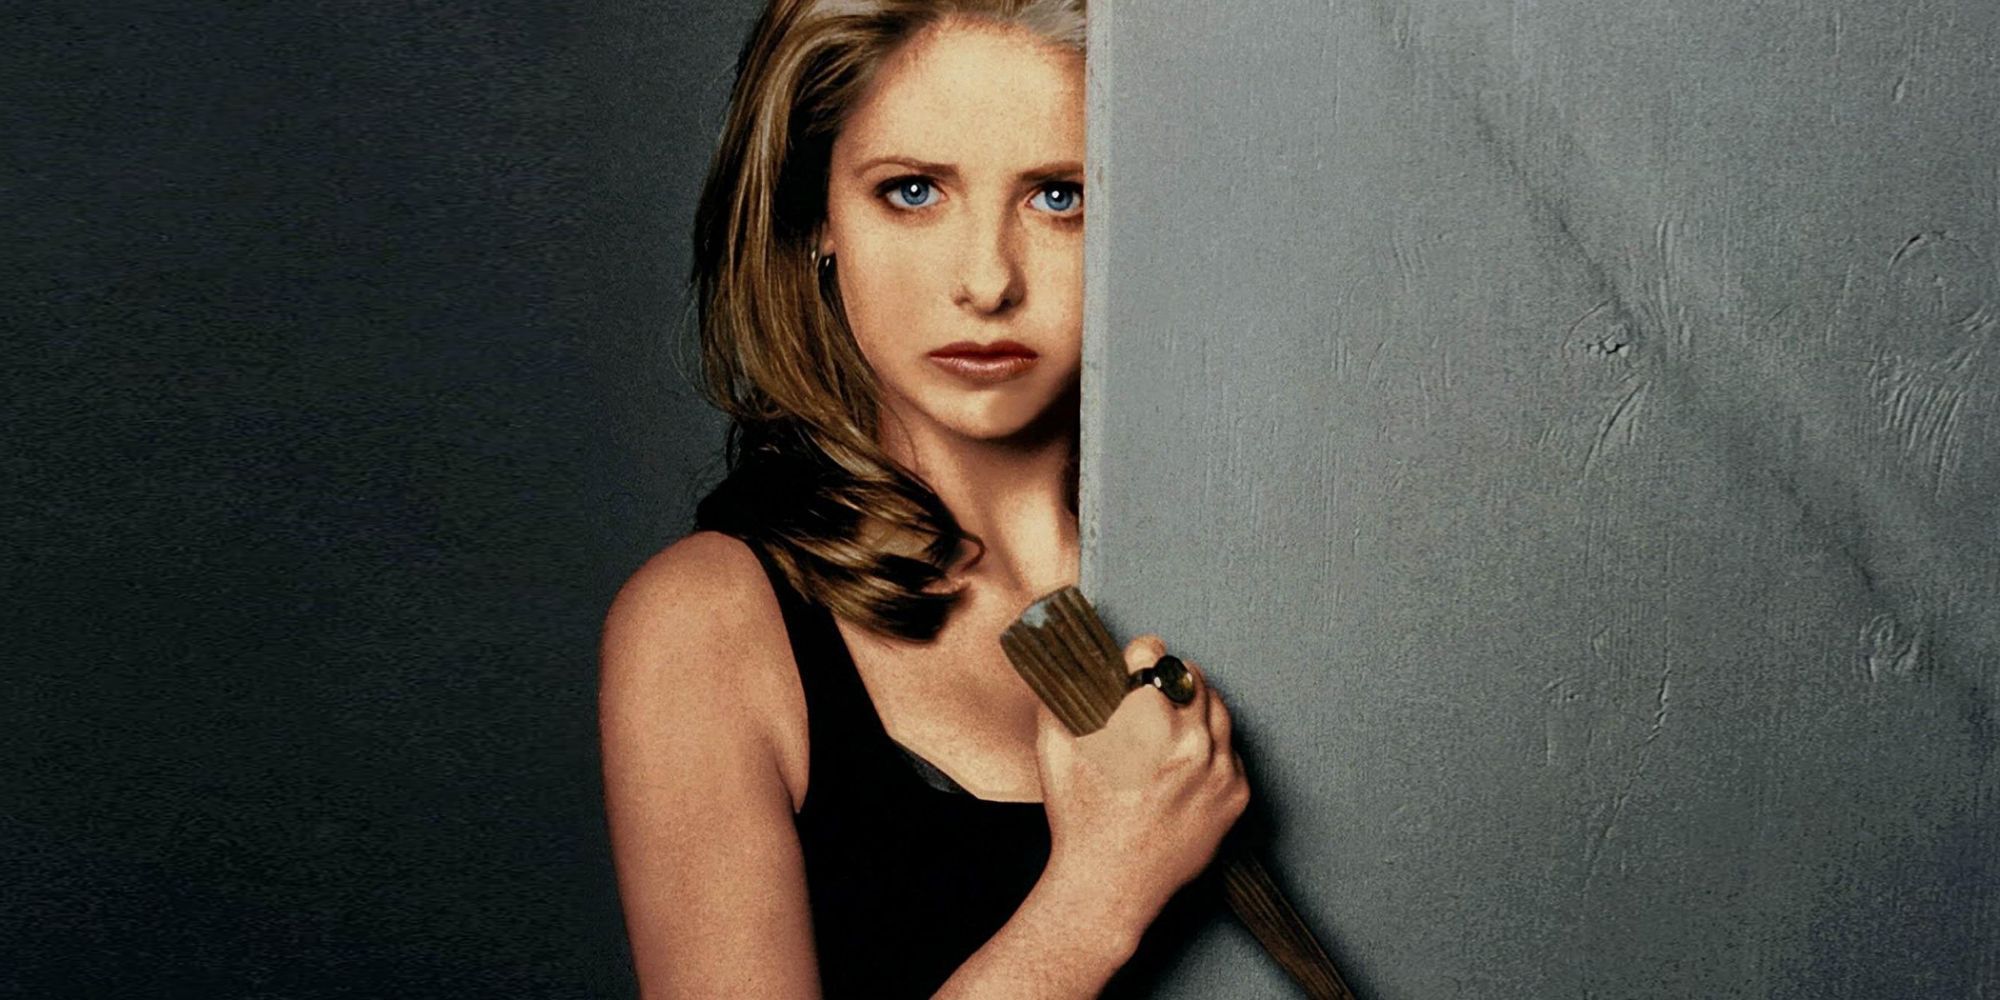 An image of Buffy Summers holding a stake